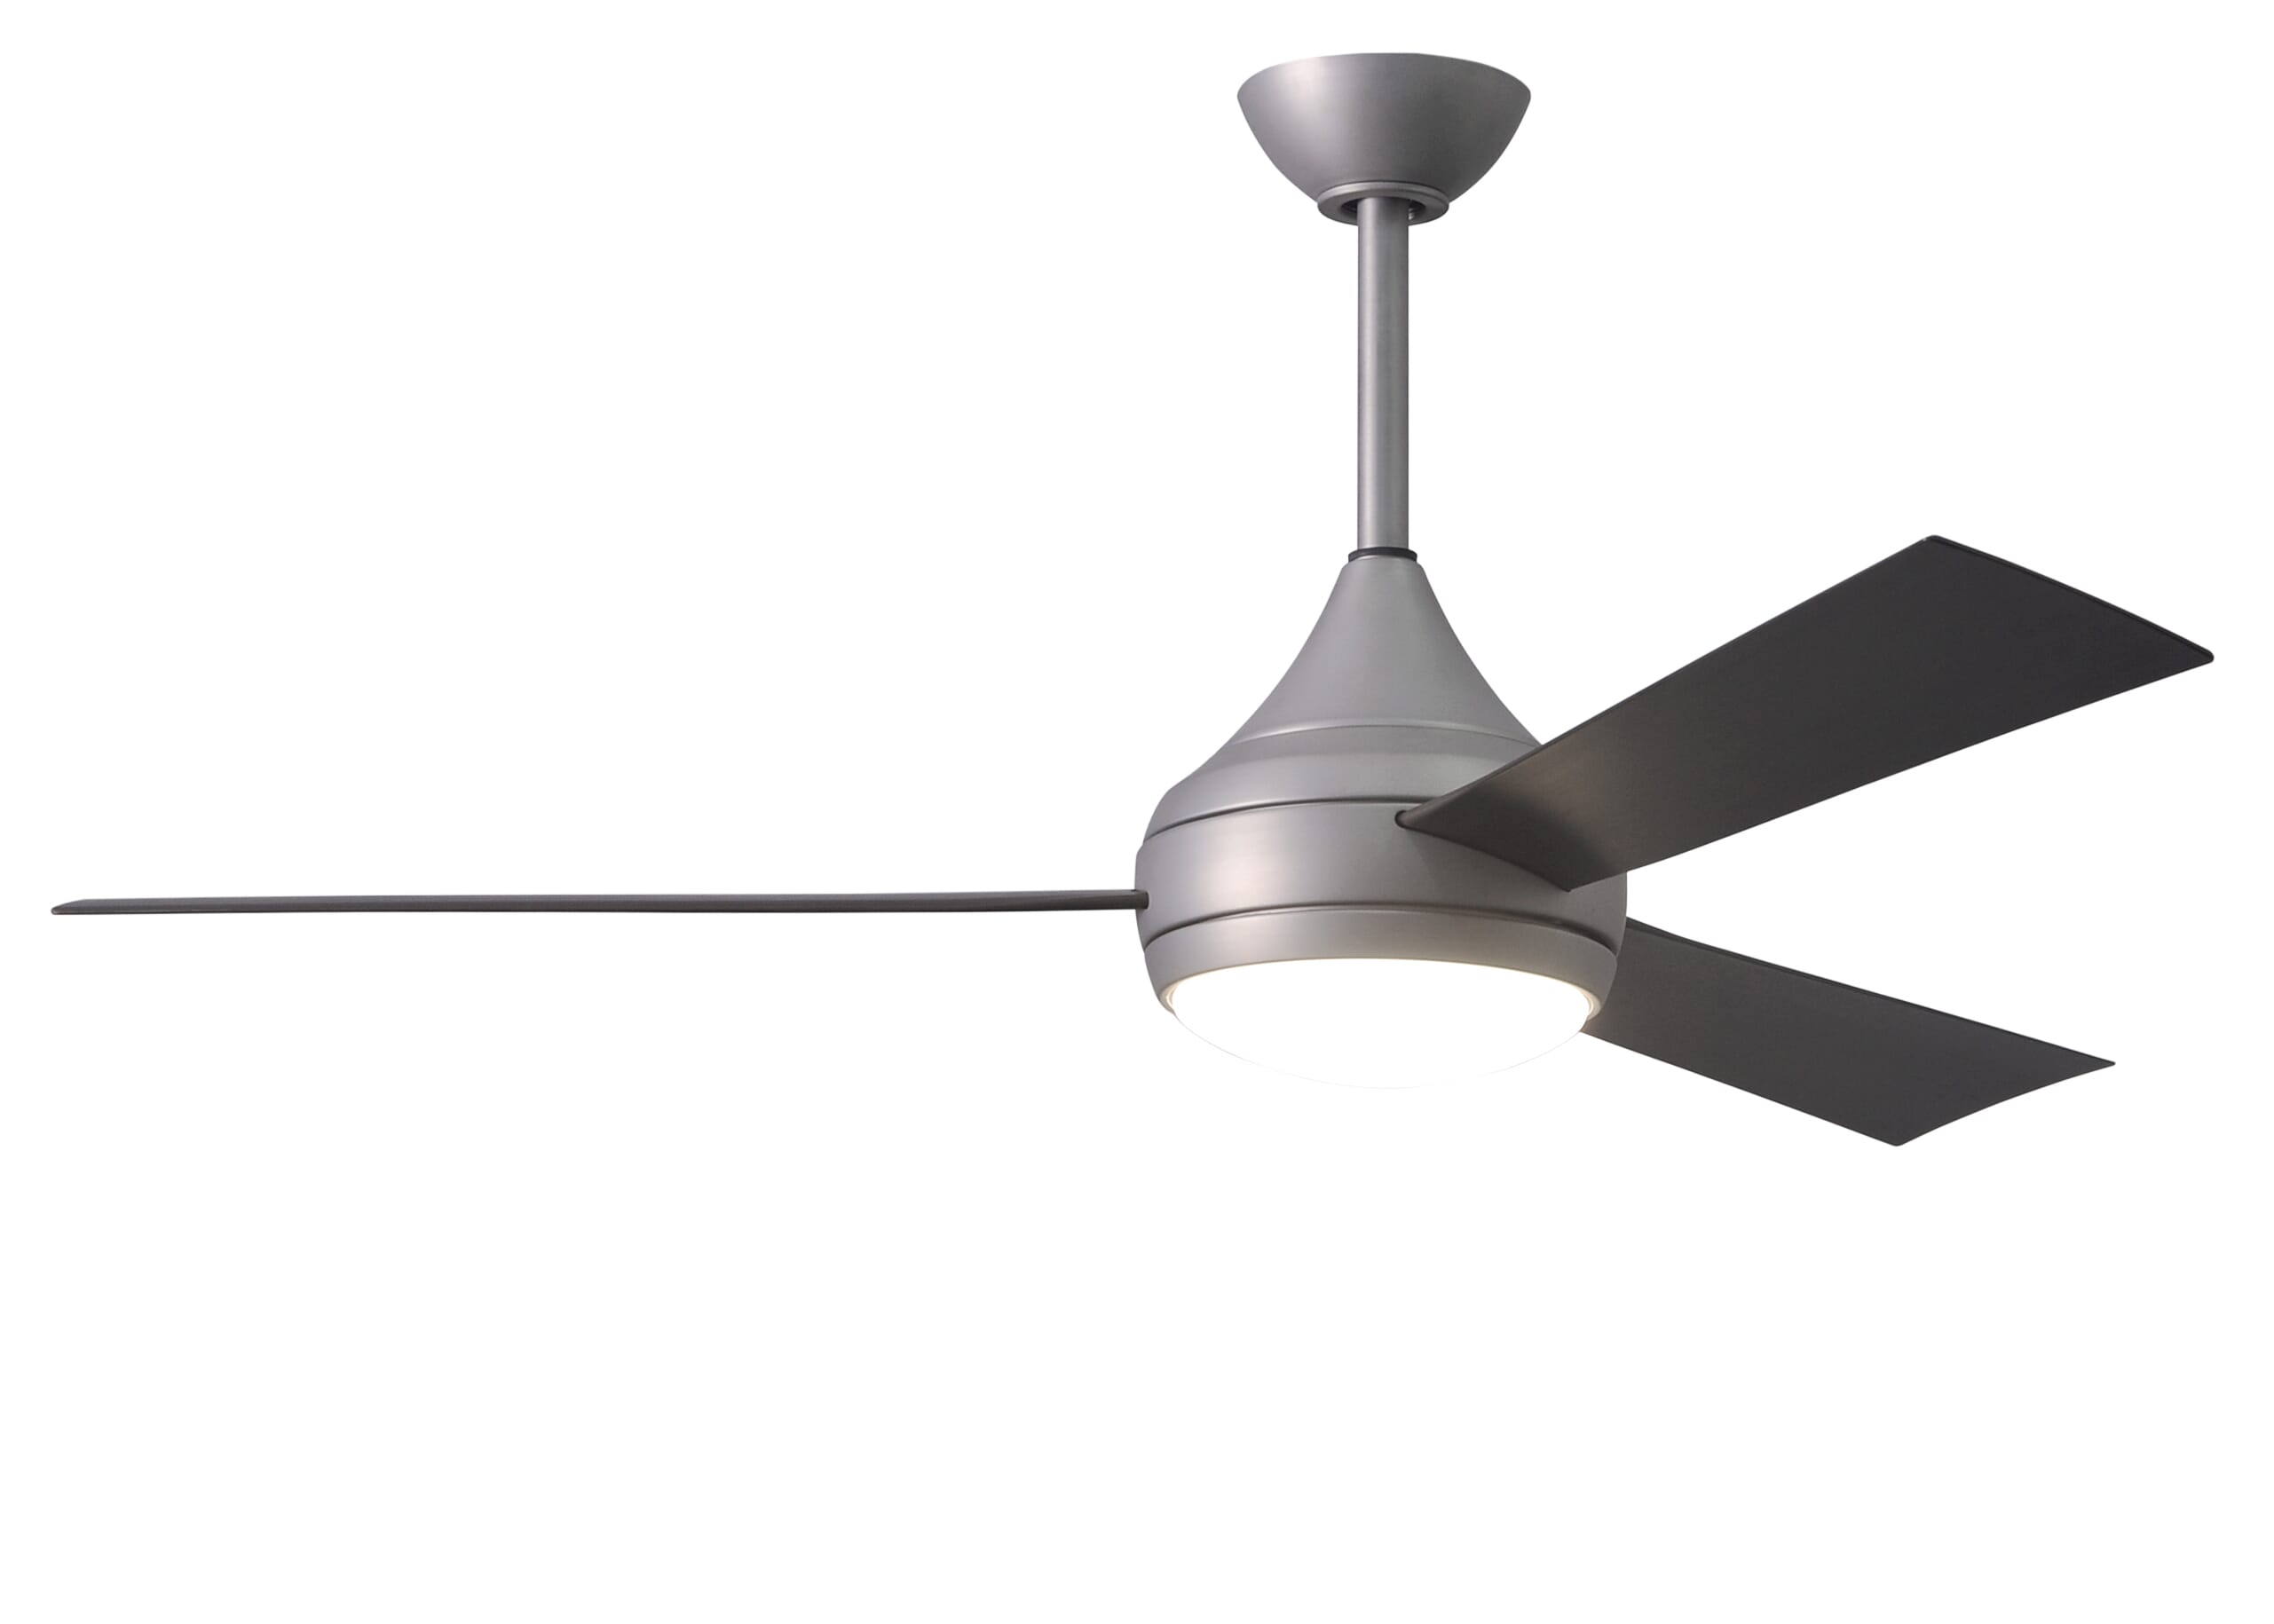 Matthews Donaire 52"" Indoor/Outdoor Ceiling Fan in Brushed Stainless with Brushed Bronze Blades - DA-BS-BB -  Matthews Fan Company